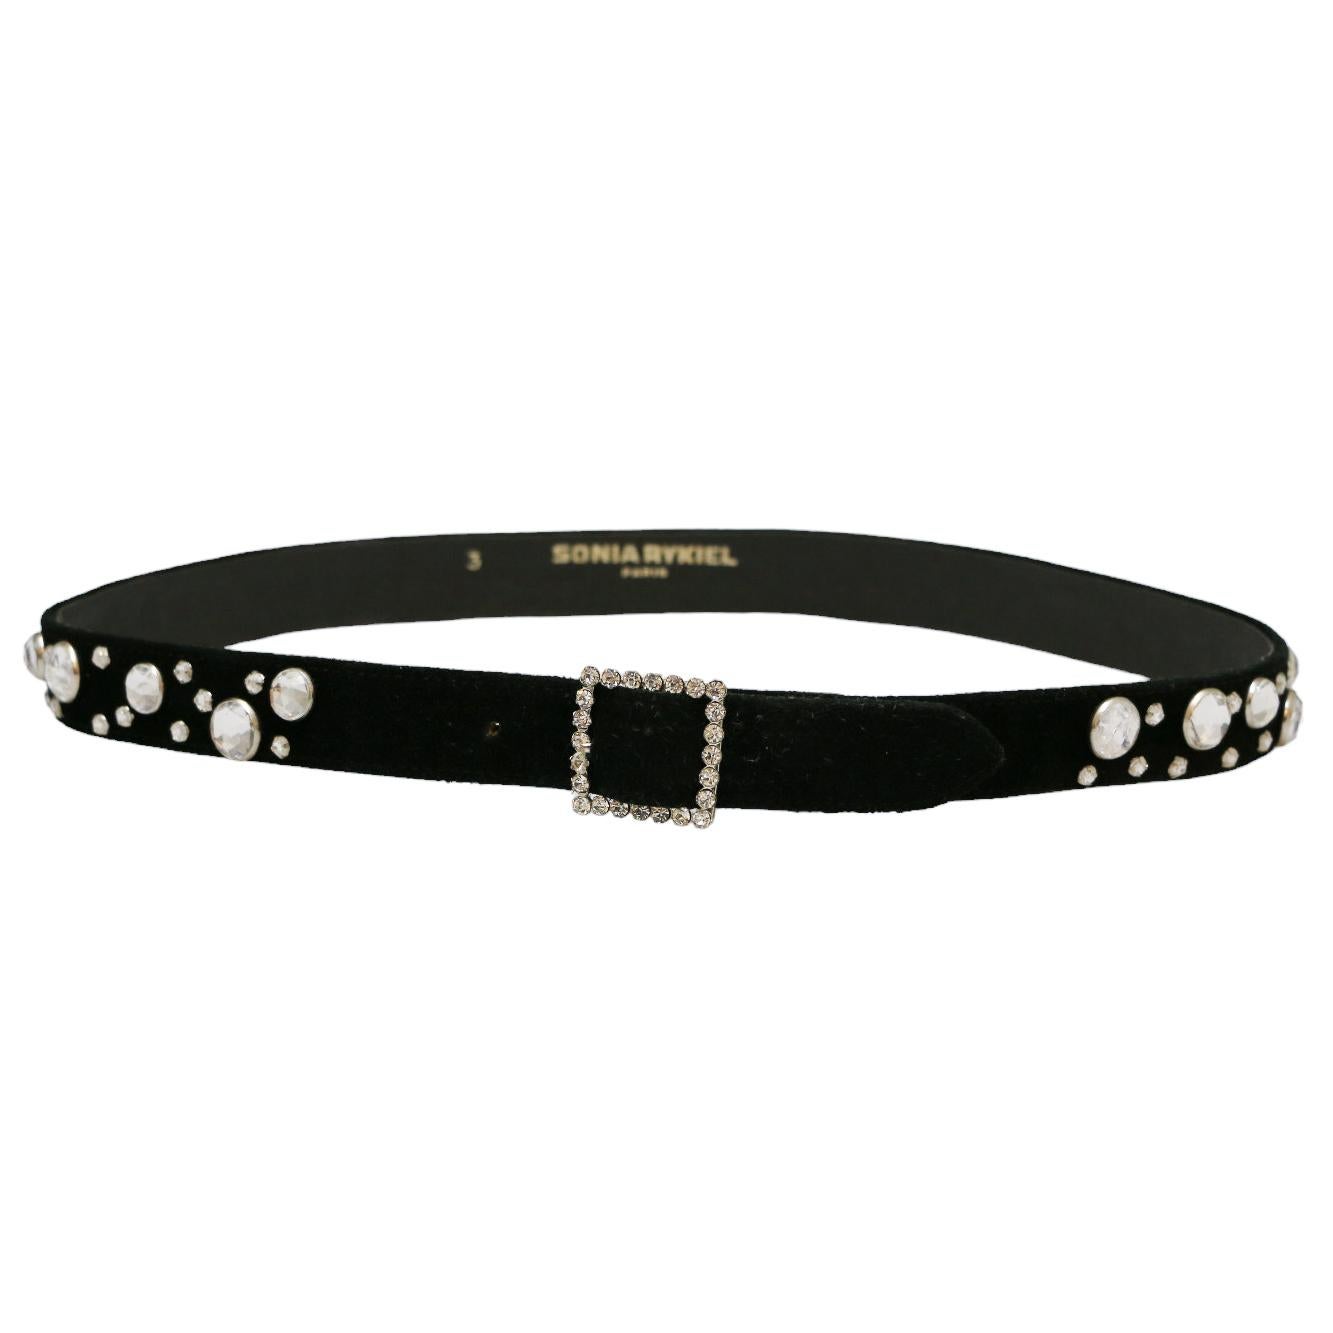 Beautiful SONIA RYKIEL black suede belt with rhinestones
Condition: good
Made in France
Material: suede, rhinestones
Color : black
Size: 75 / 3
Dimensions: three holes, first hole 72 cm, last hole 77 cm
Hardware: silver
Details: good condition, as